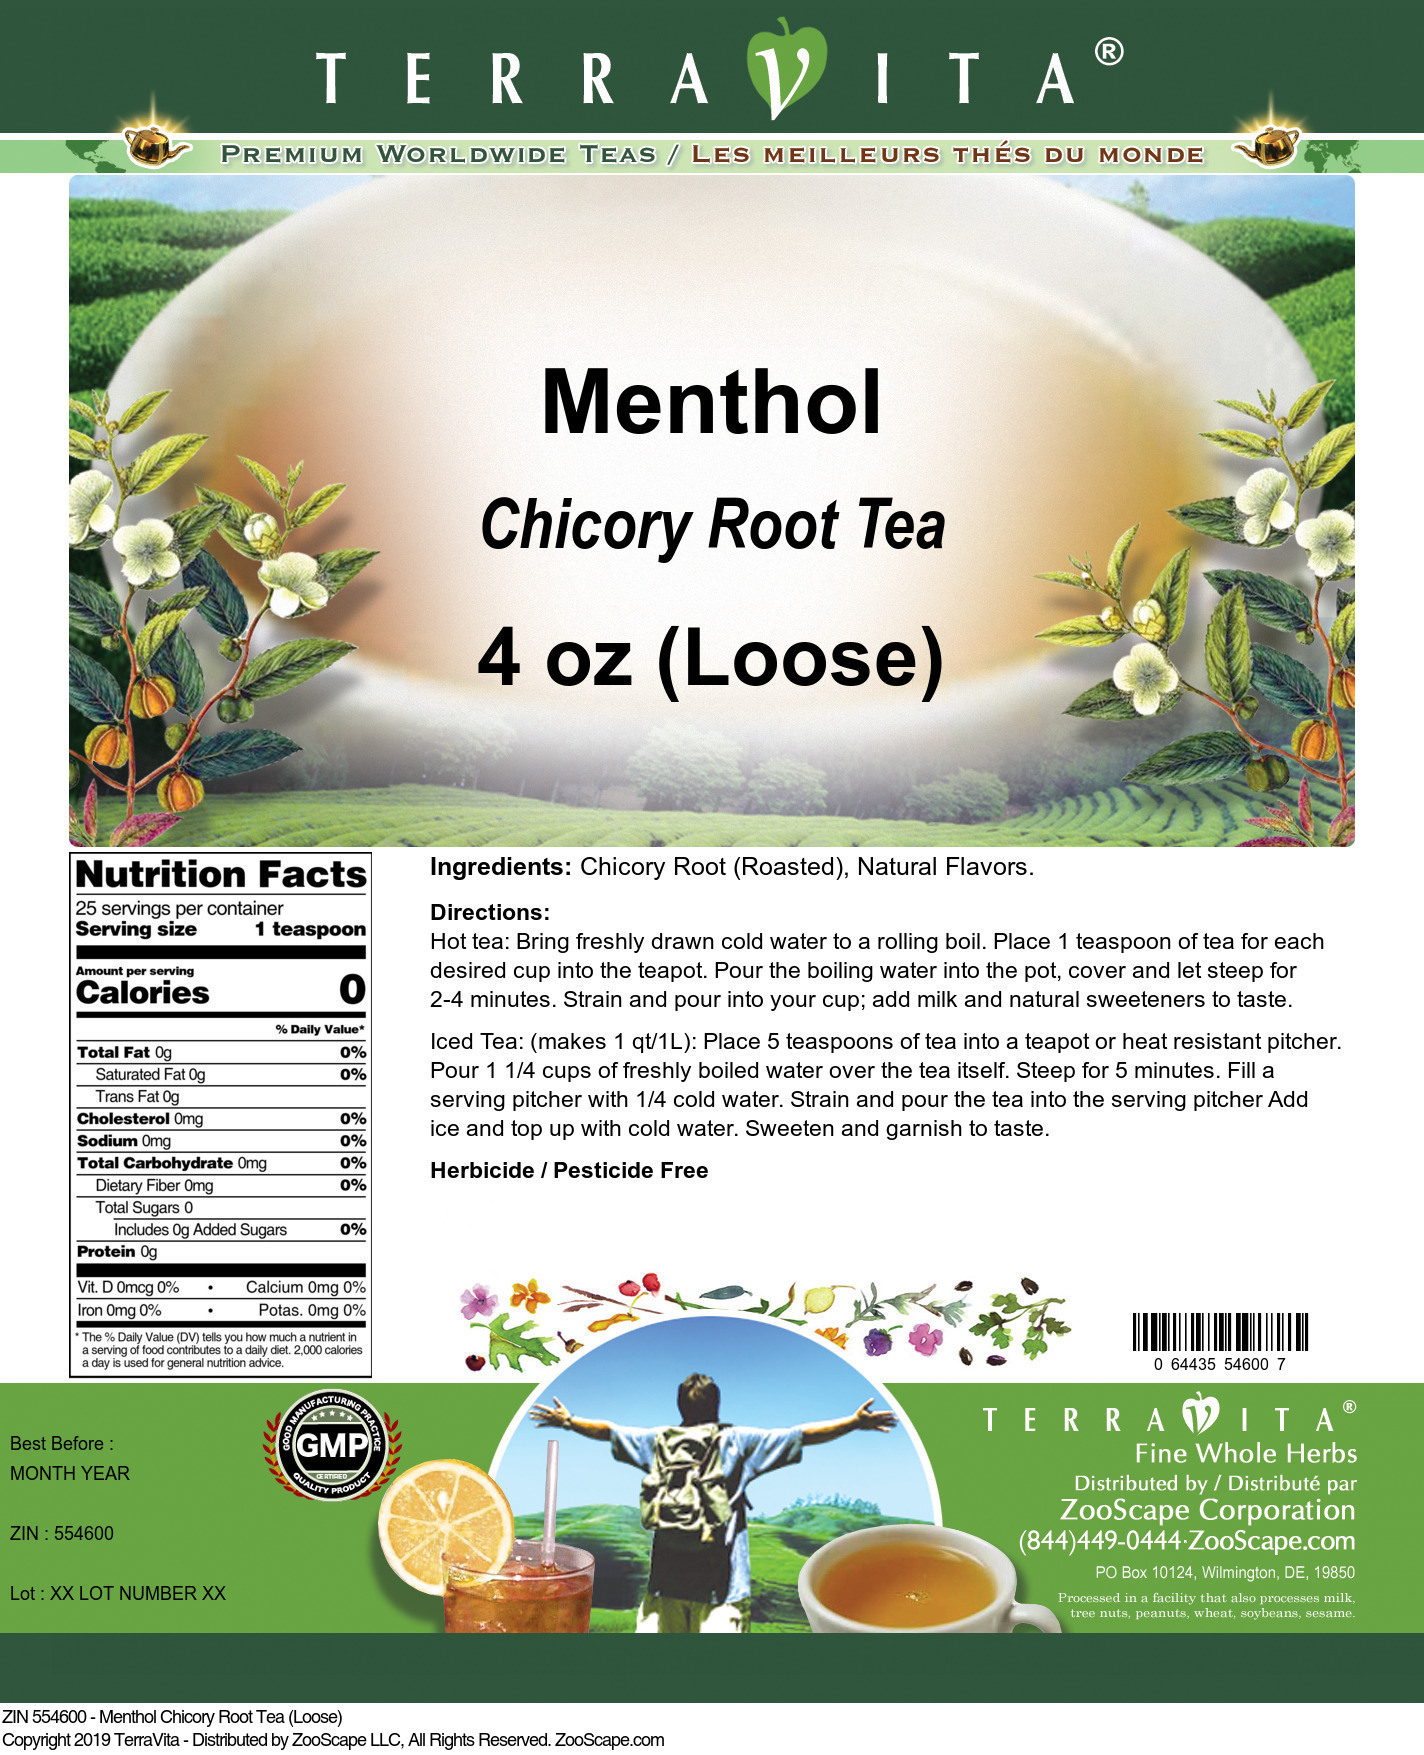 Menthol Chicory Root Tea (Loose) - Label